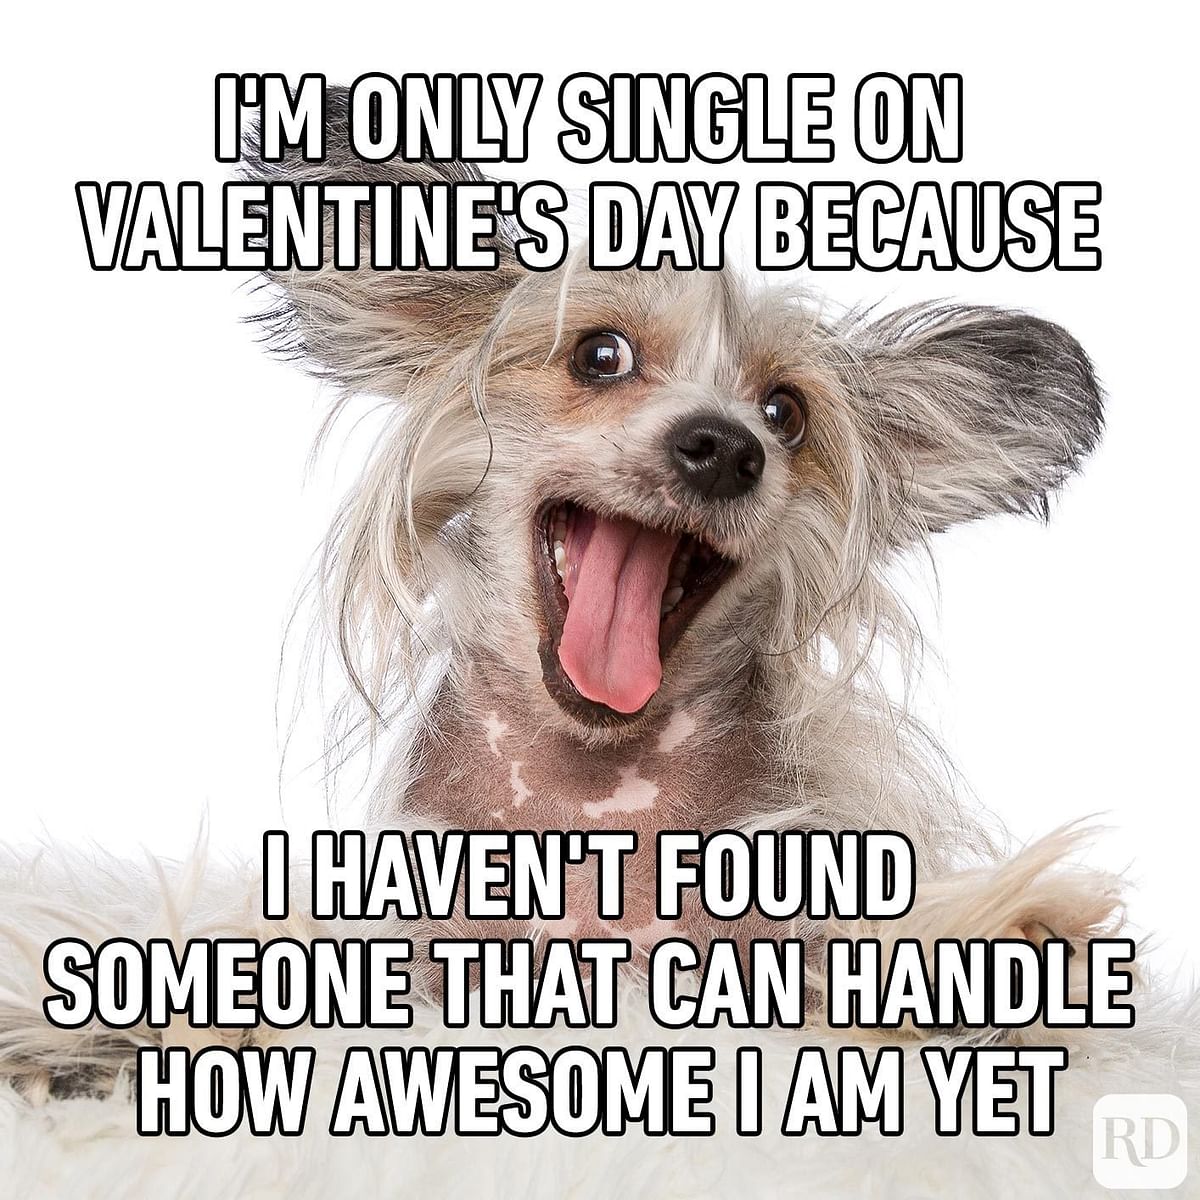 Valentine’s Day 2022 Jokes, Funny Memes, Images, Quotes for Singles